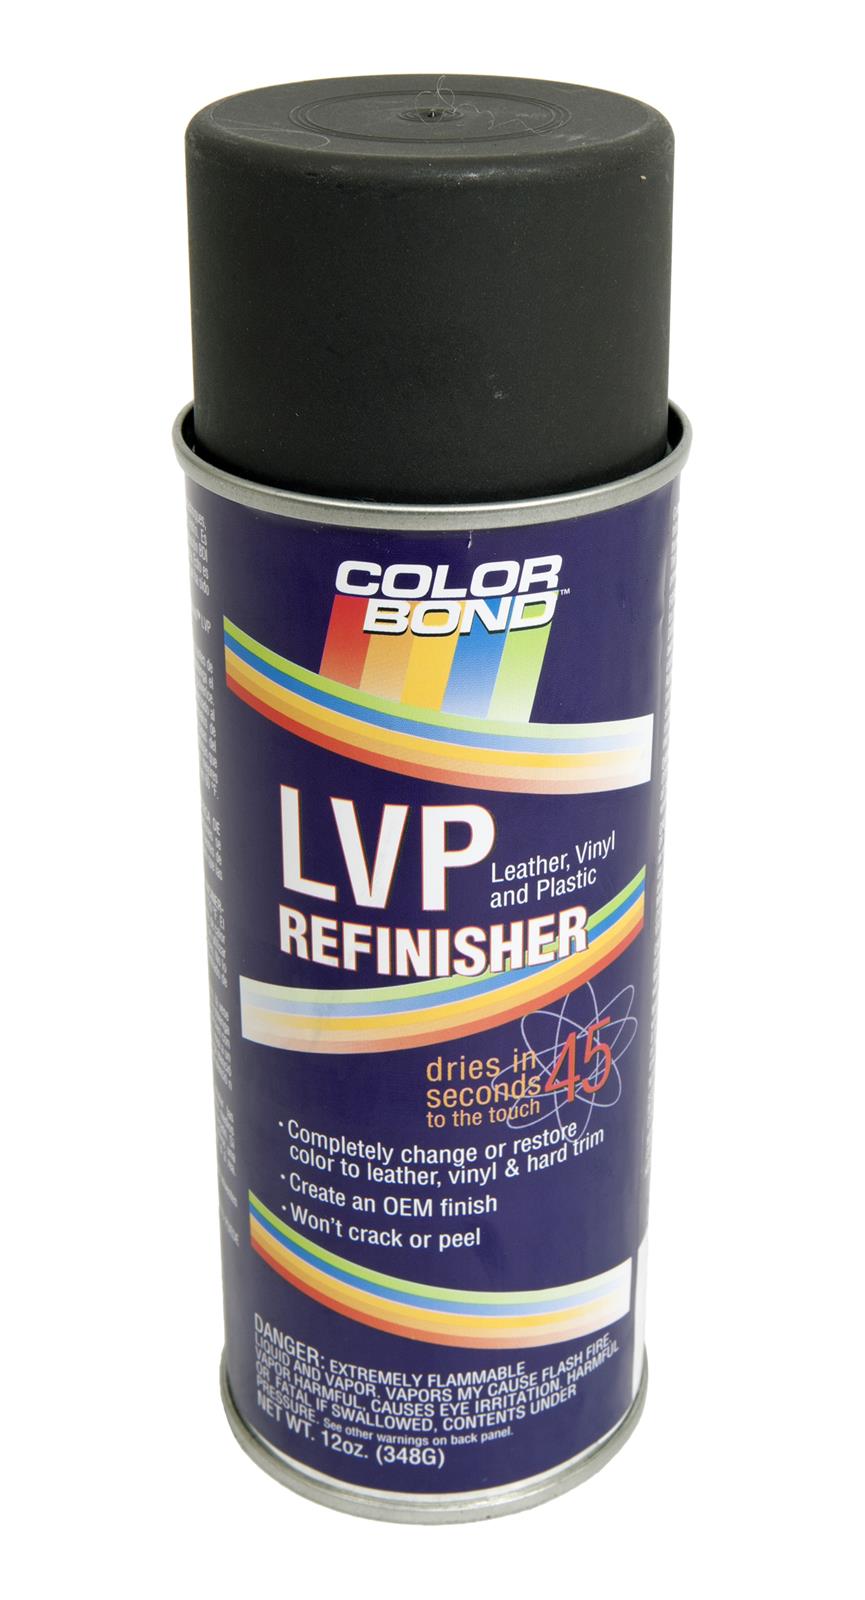 How To Apply ColorBond LVP Refinisher 